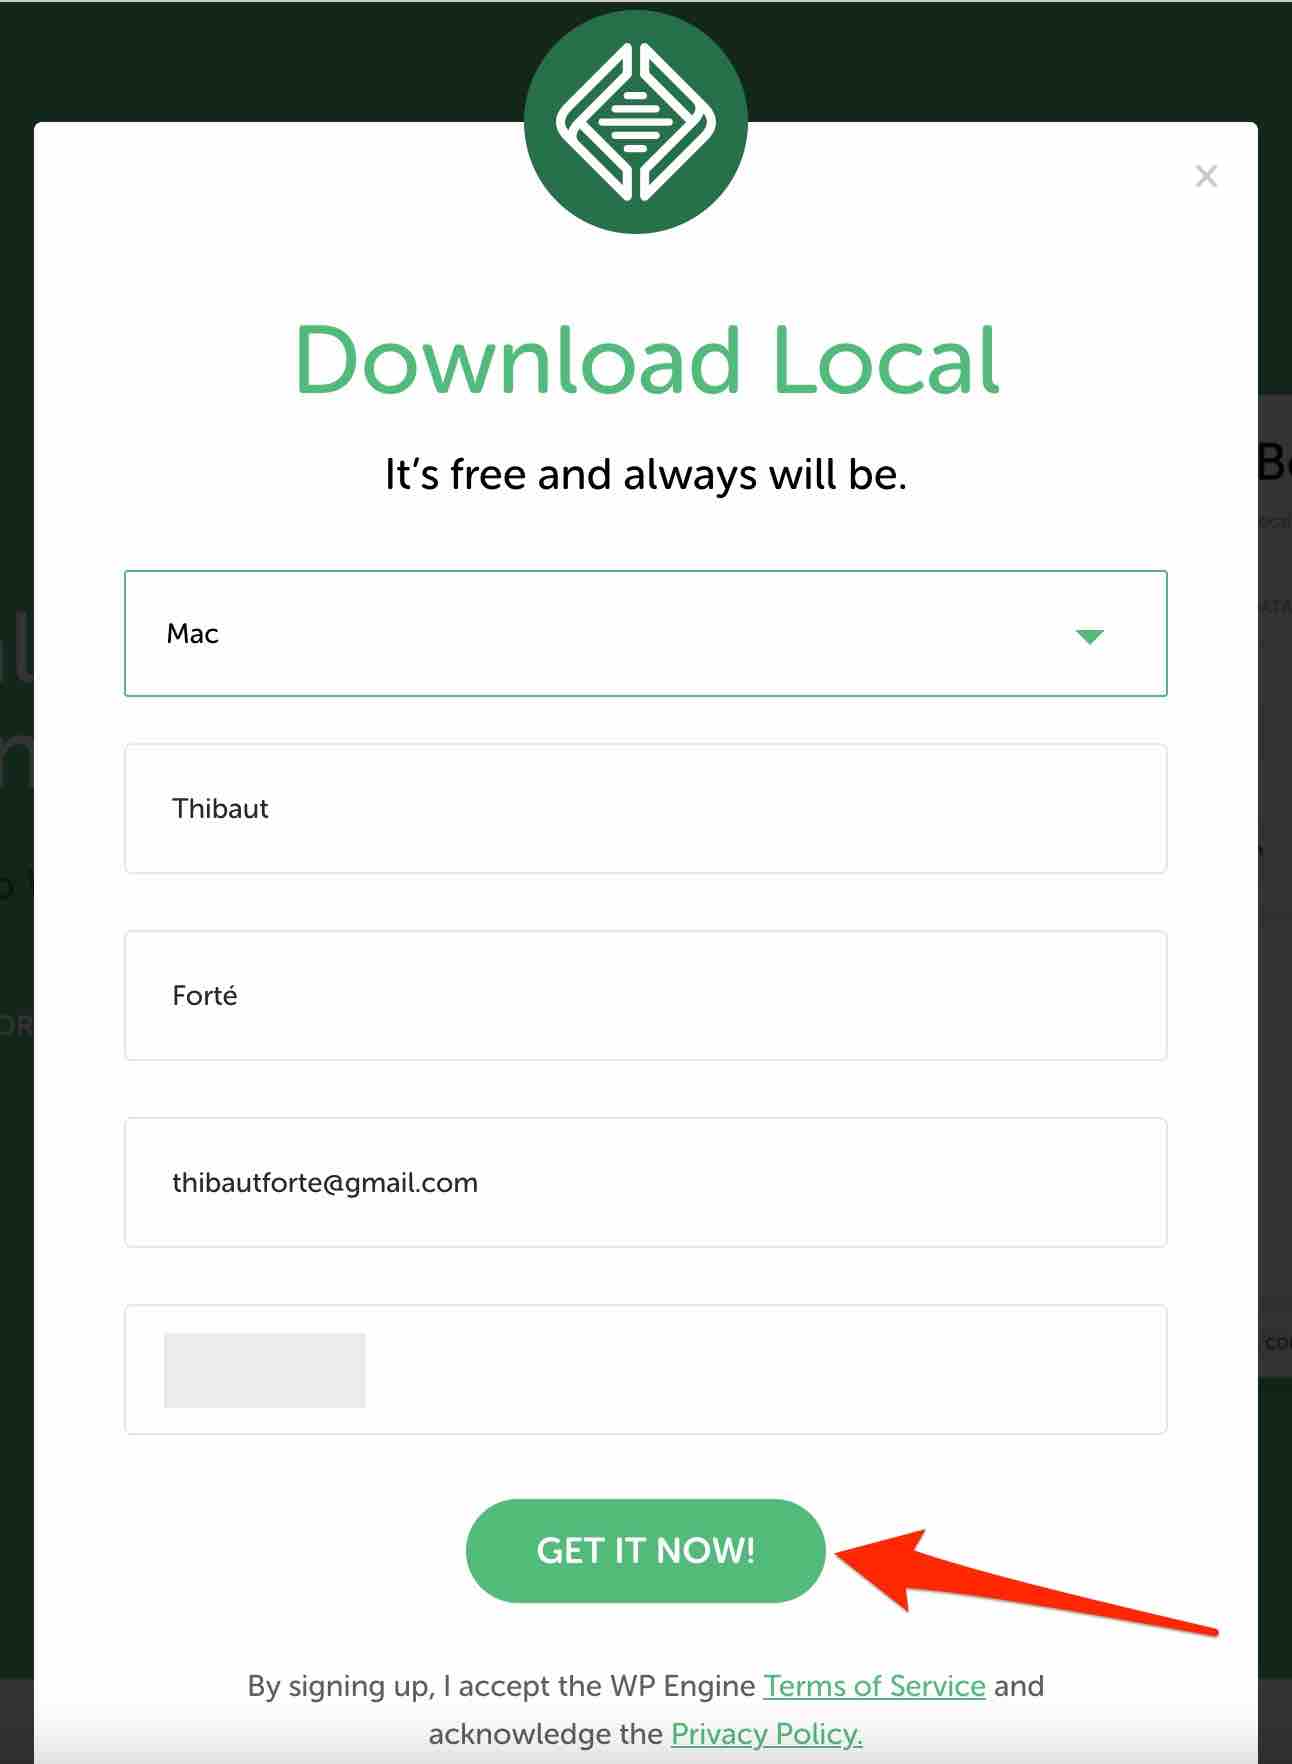 Download the Local software.